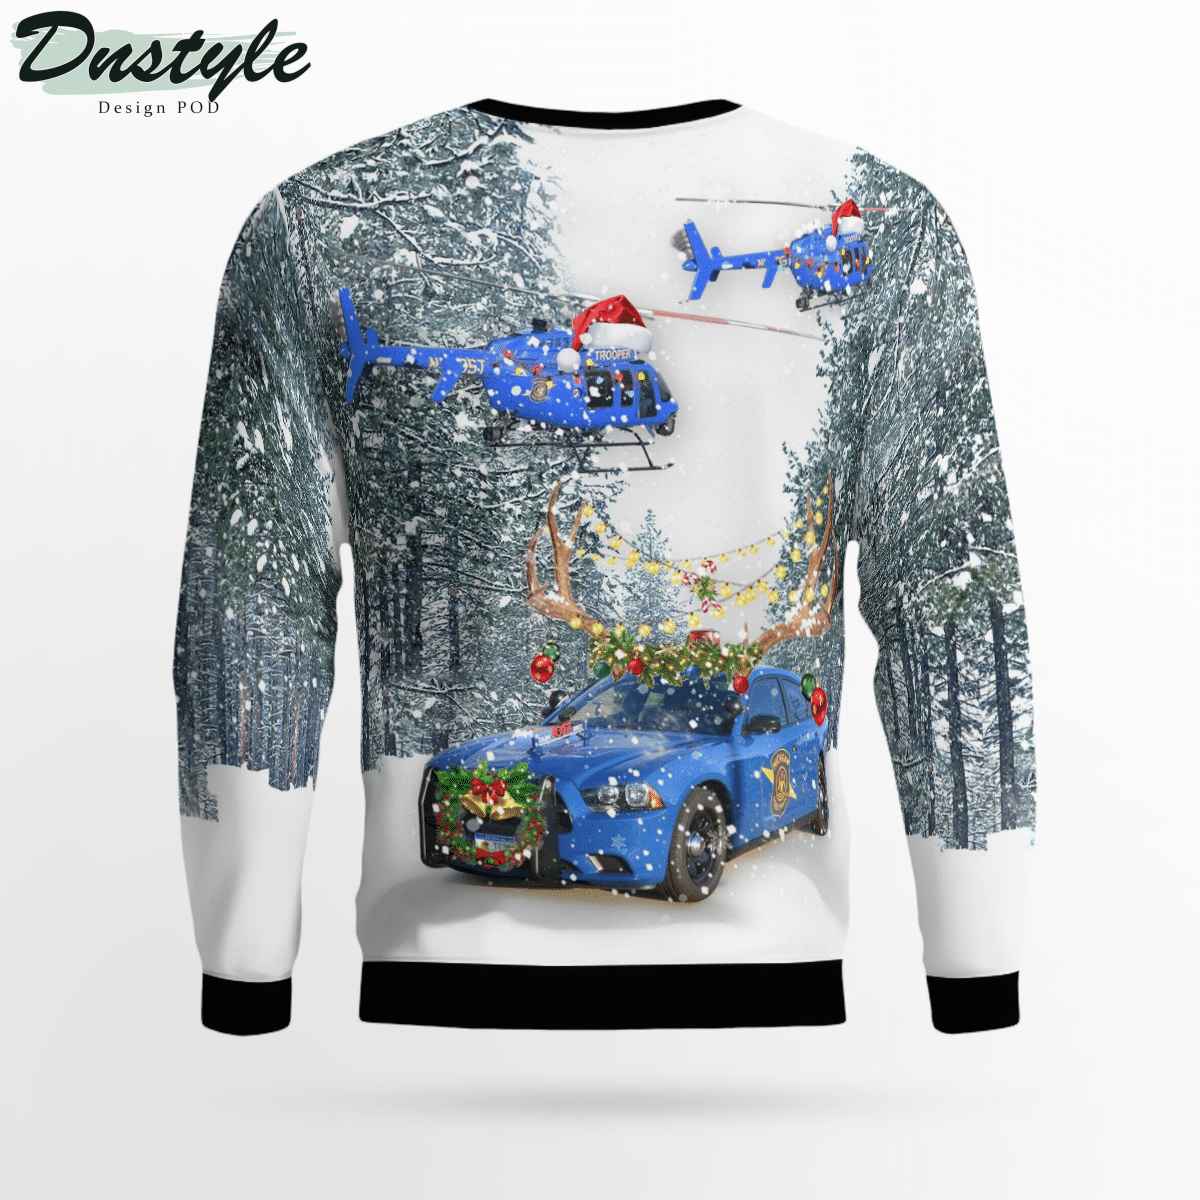 Michigan State Police Dodge Charger & Helicopter Ugly Christmas Sweater